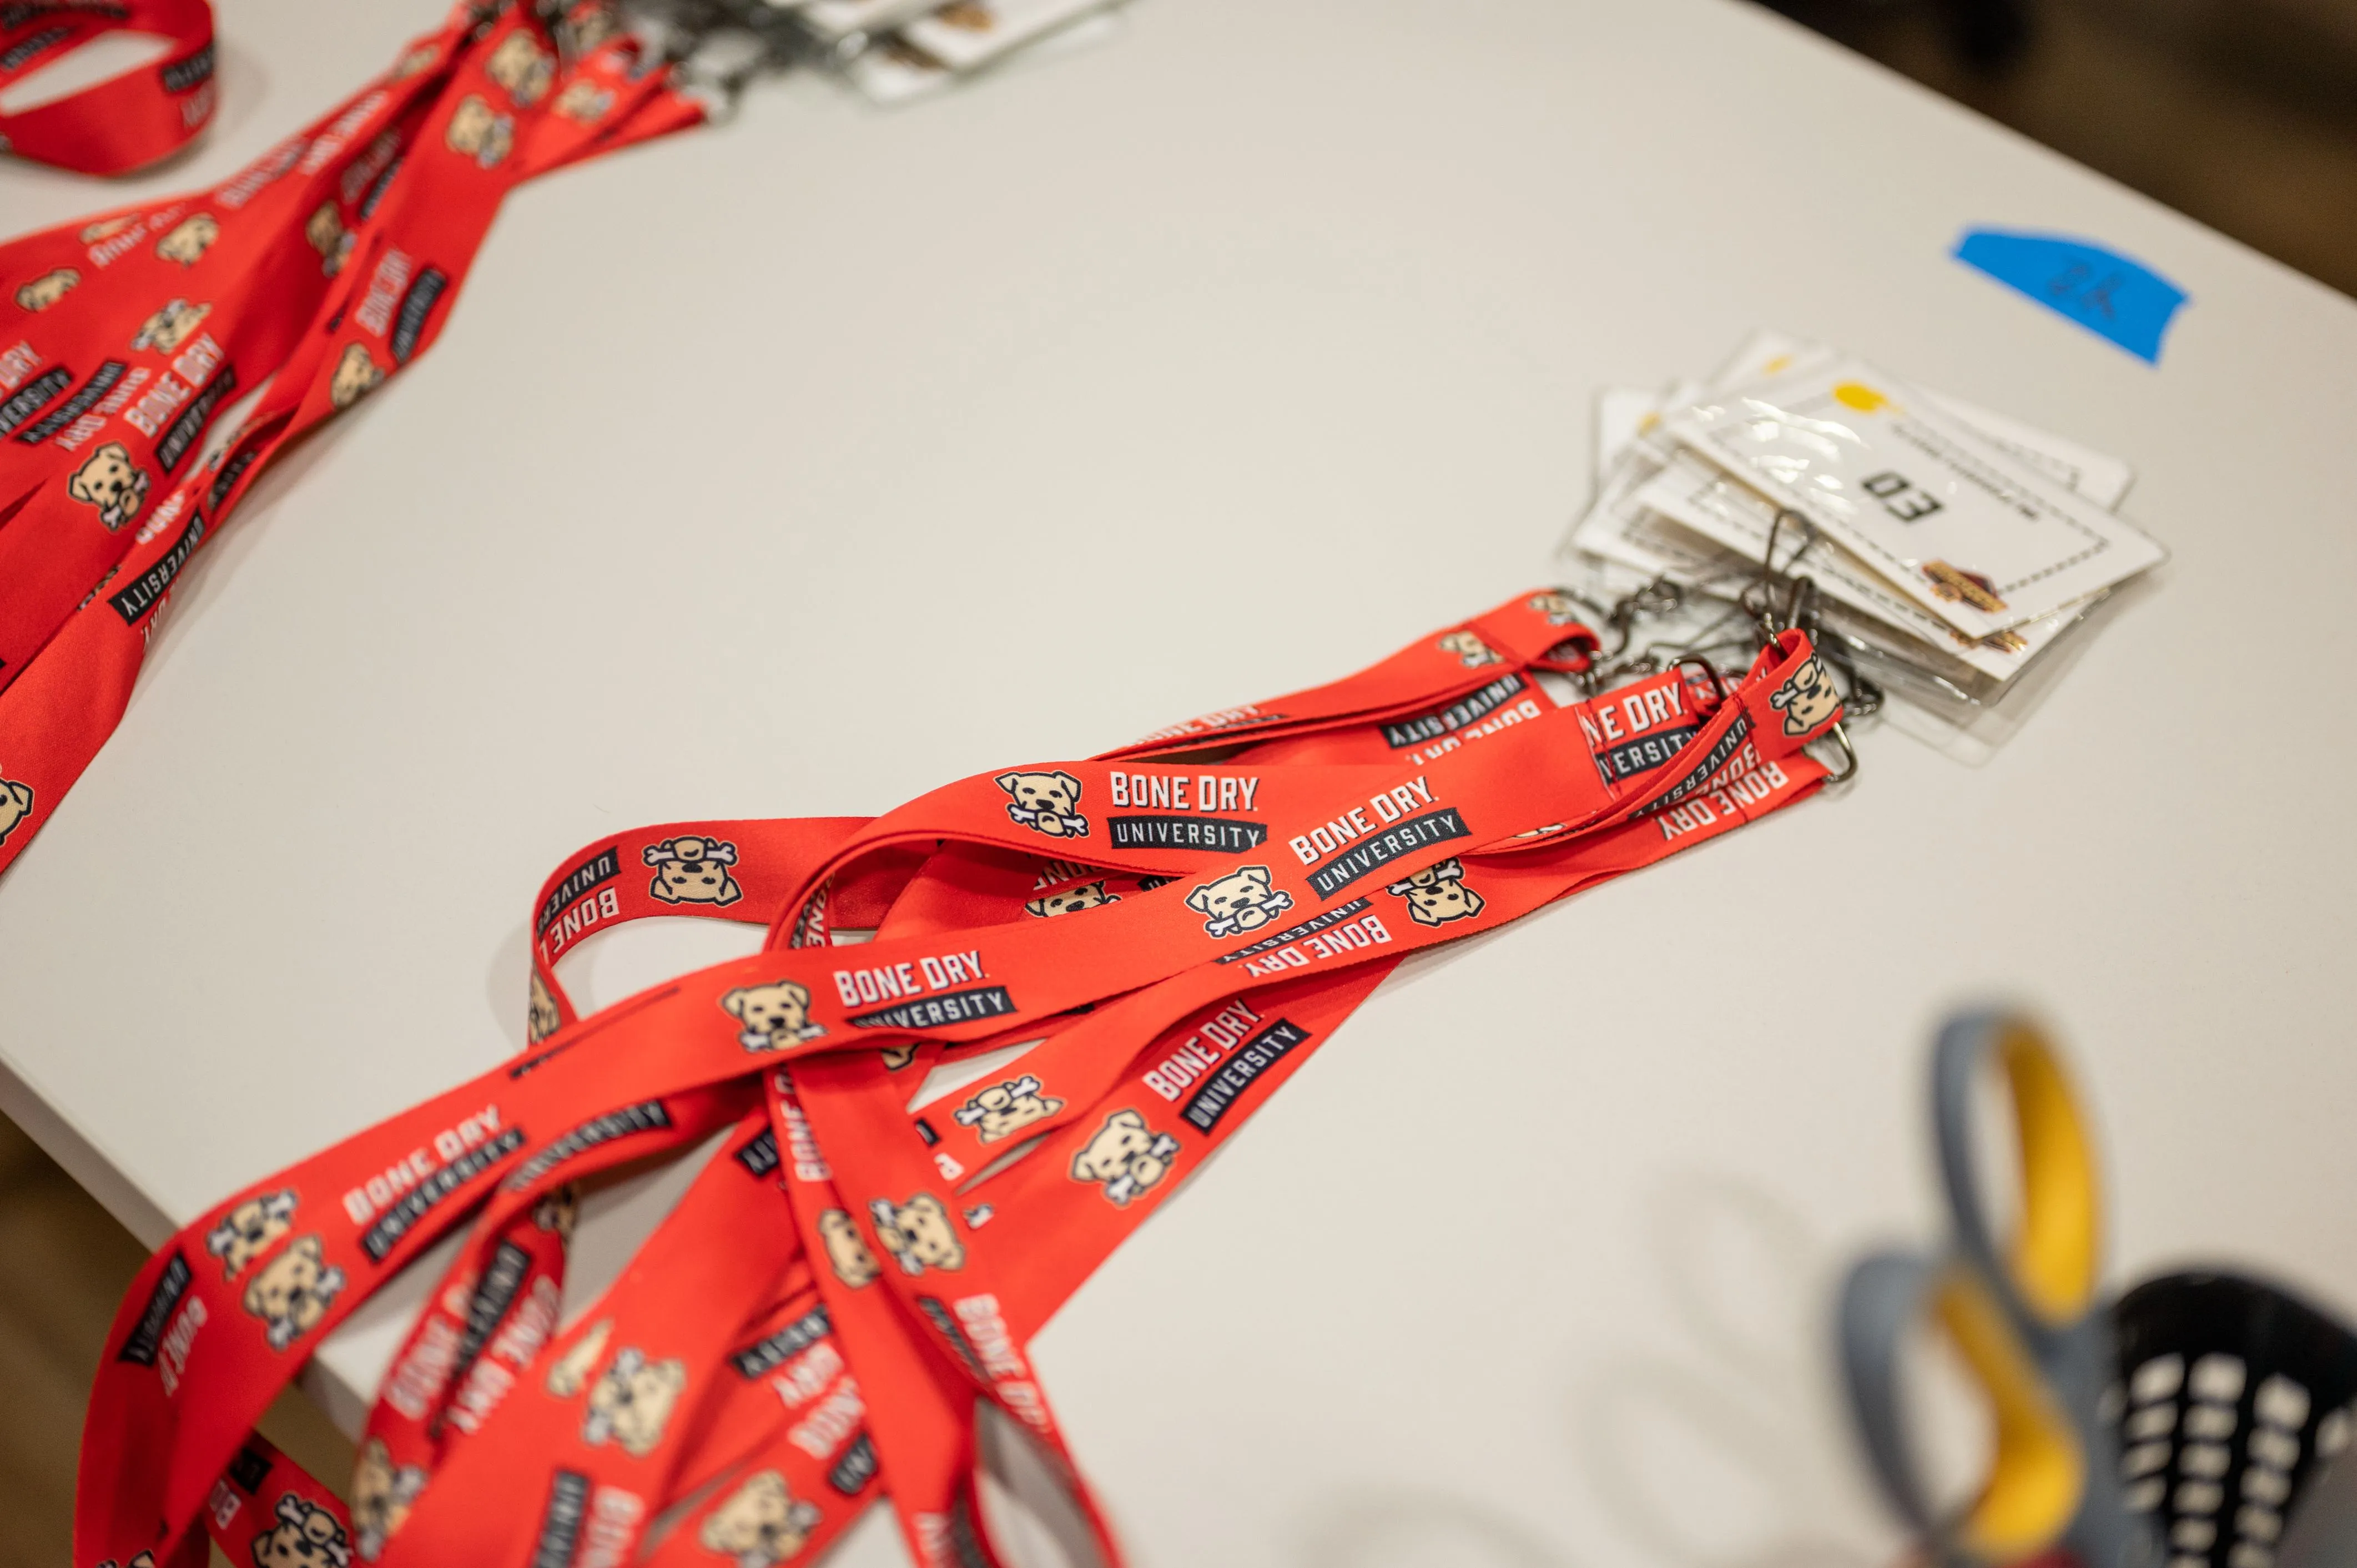 Red lanyards with event passes on a table alongside office supplies.